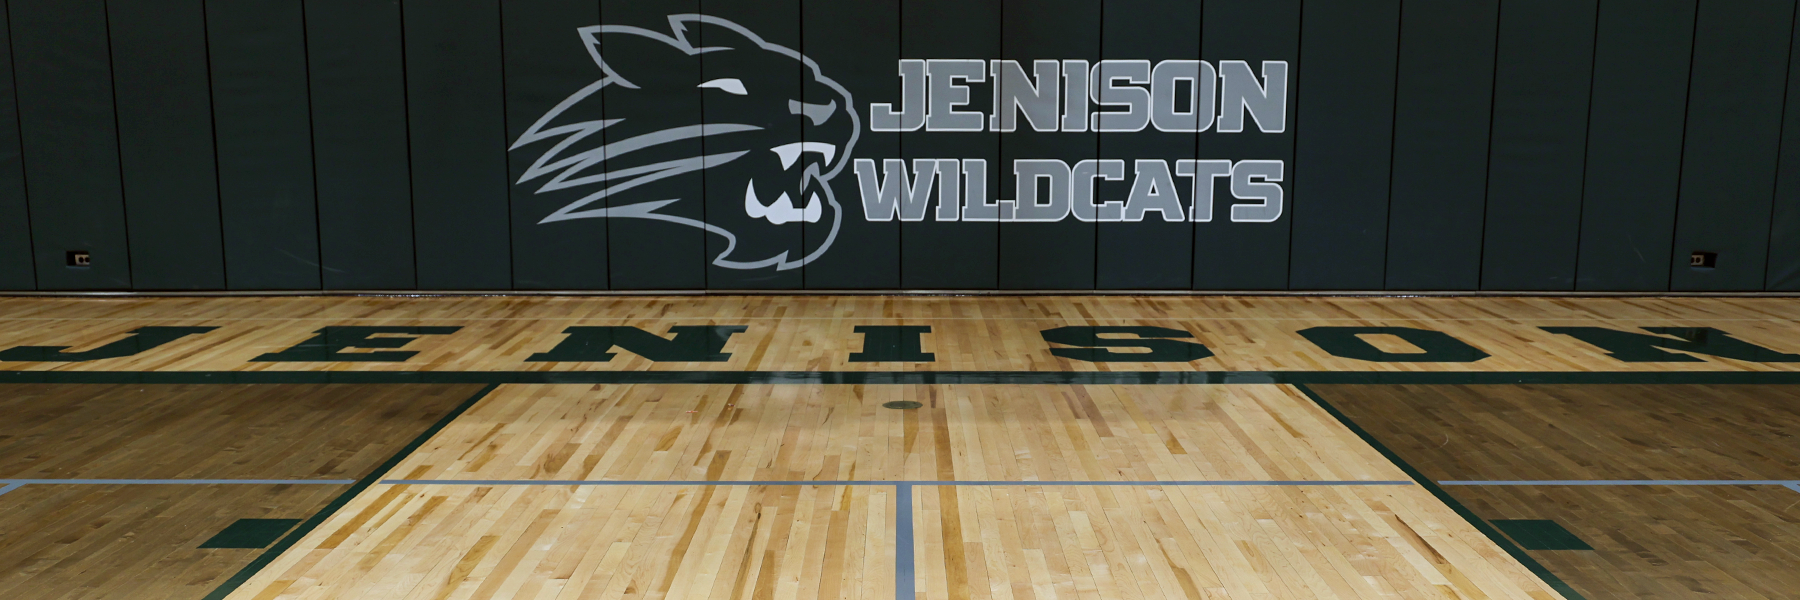 Gym with Wildcats and Jenison Logos